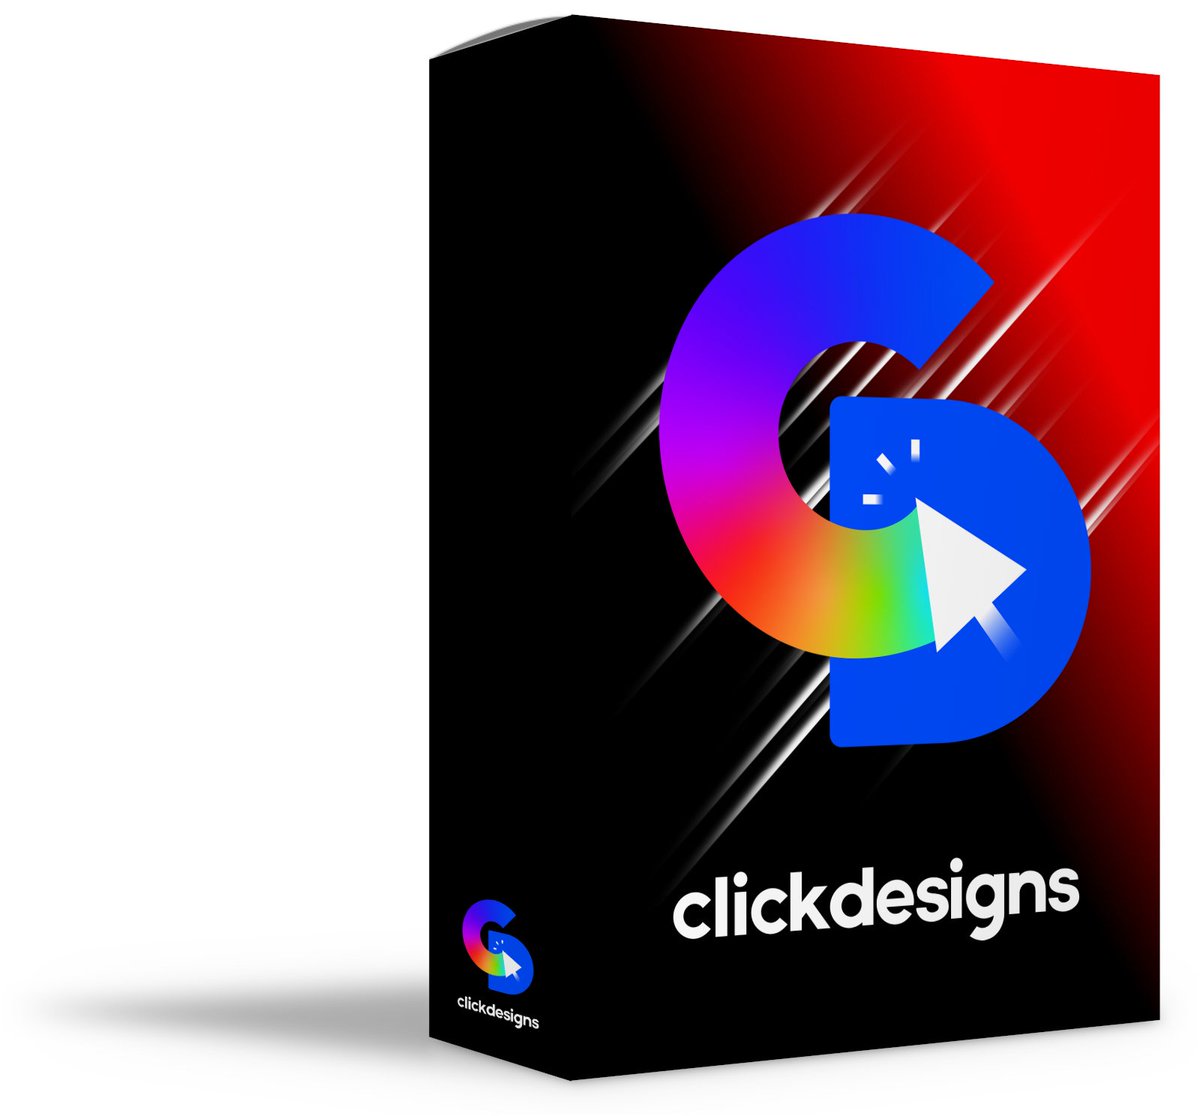 Create Incredibly Amazing Graphics & Designs For Blogs, Websites, Sales Funnels & Site Builders In Minutes! 
bit.ly/click-designs 

#design #graphicdesign #graphics #graphicsoftware #ecovers #boxshots #mockupdesign #mockups #designer #banners #freelancers #designers #creative